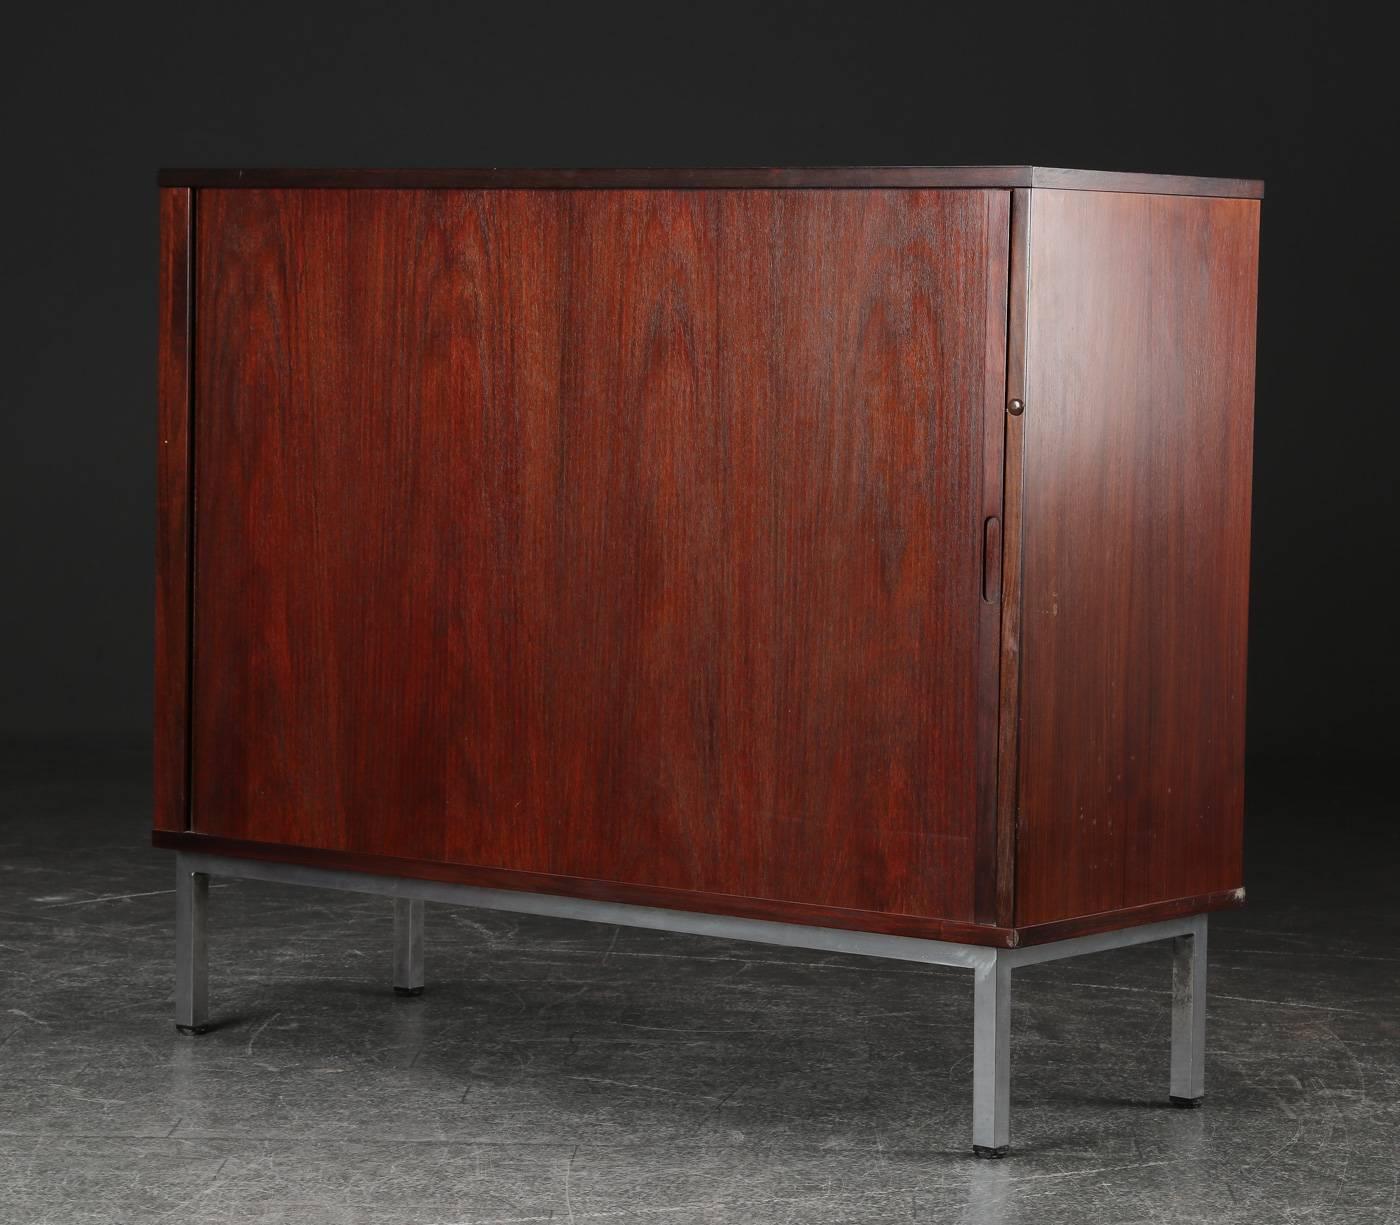 Cabinet veneered in hardwood with louvered doors, mounted with steel legs. Made in Denmark in the 1960s.
Great vintage design with interesting lines.

 